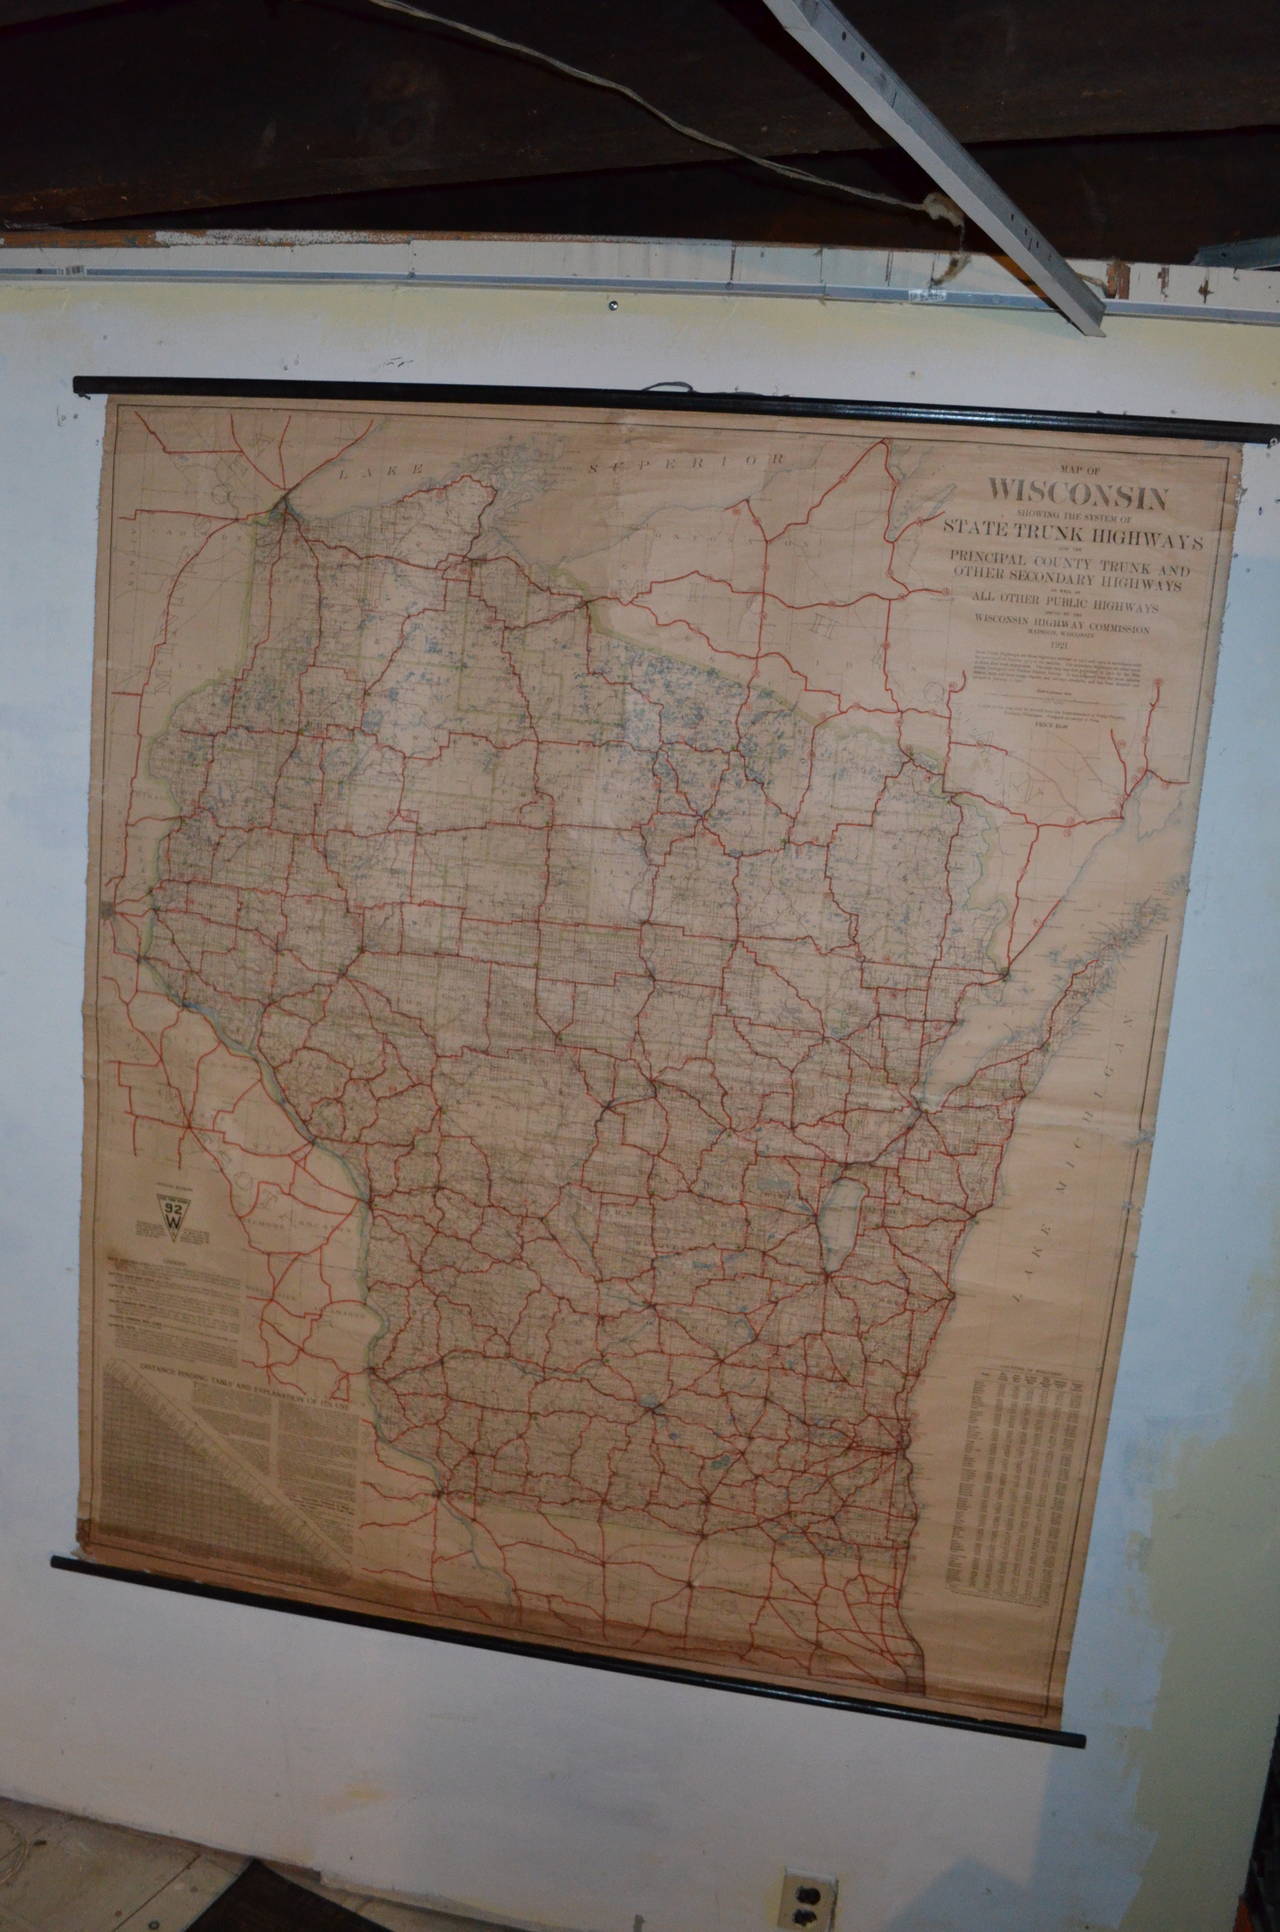 Map of Wisconsin roadways and truck highways was originally composed in 1911 by the Wisconsin Geological & Natural History Survey and later revised in this 1921 edition. So subtle in its archival, earthen color tones with the roadways etched in